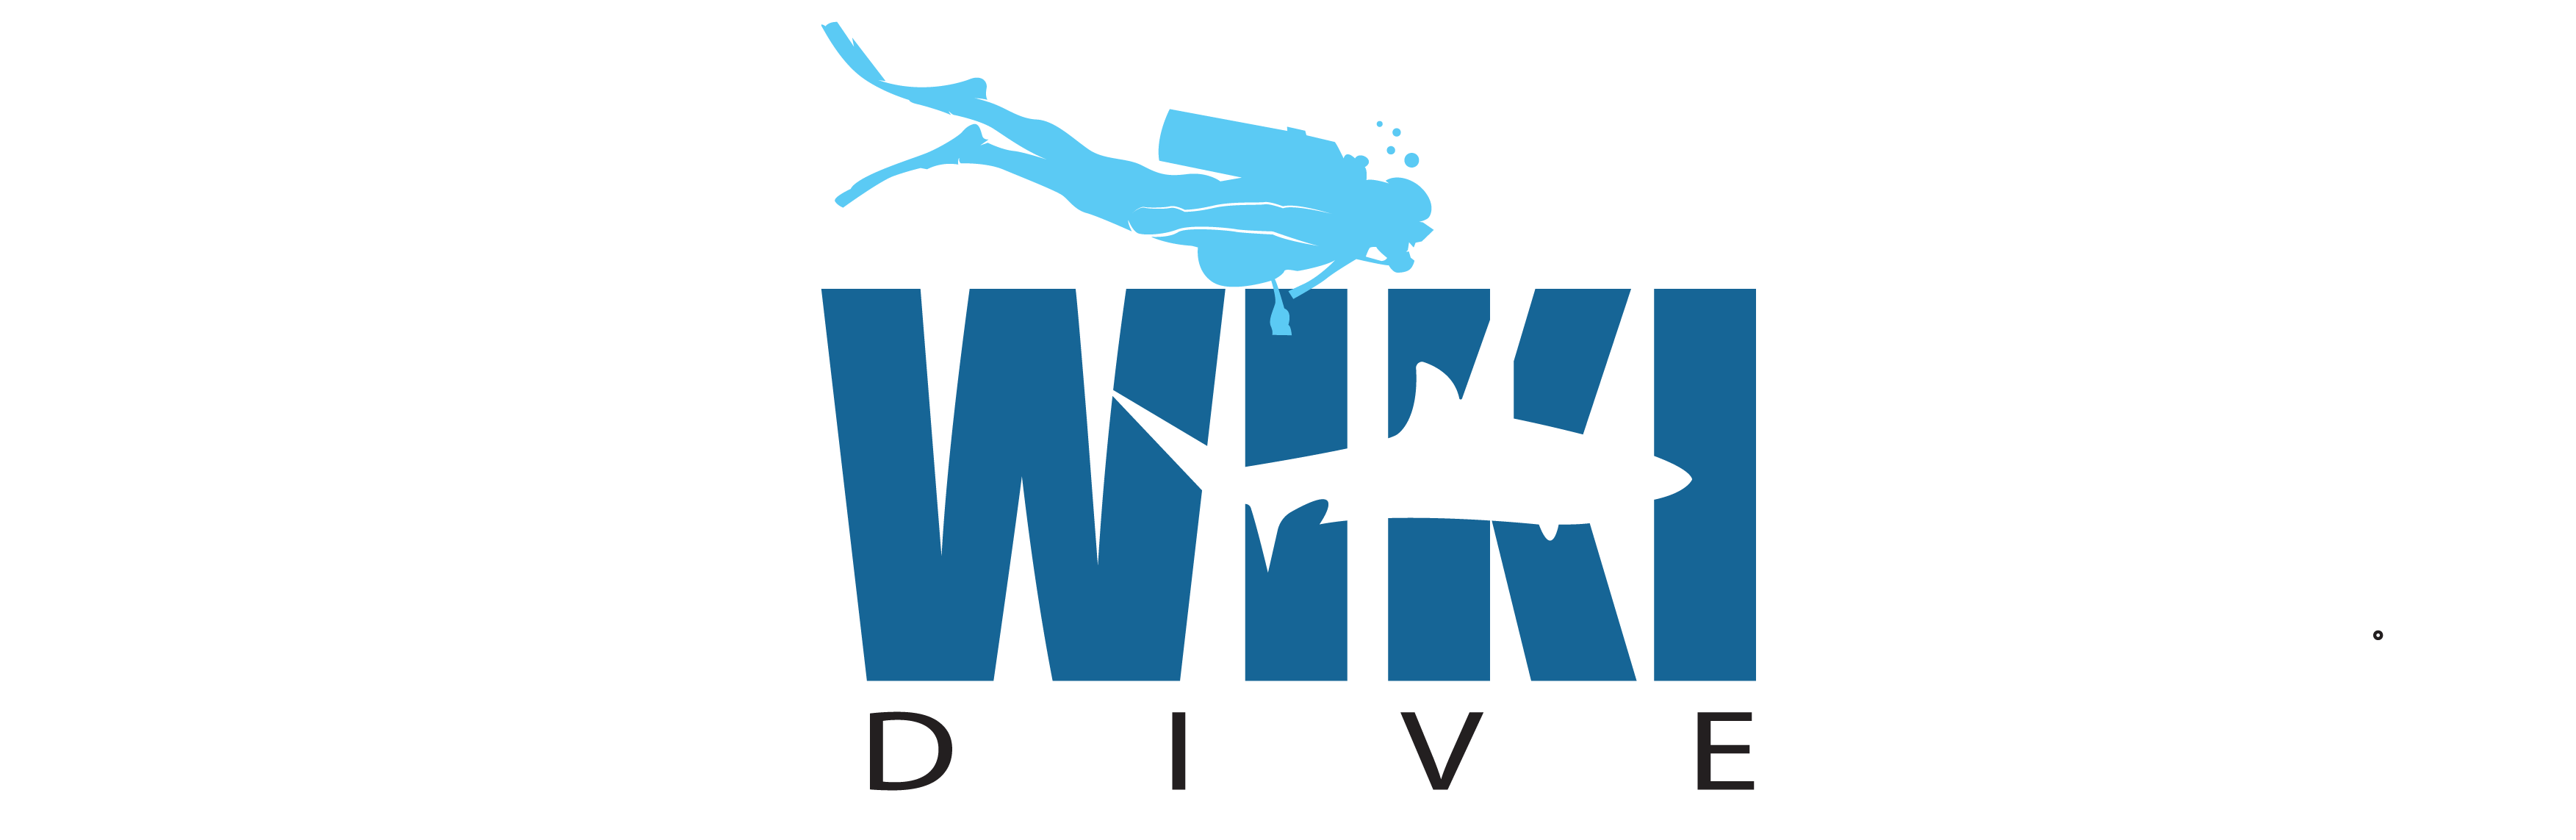 WikiDive